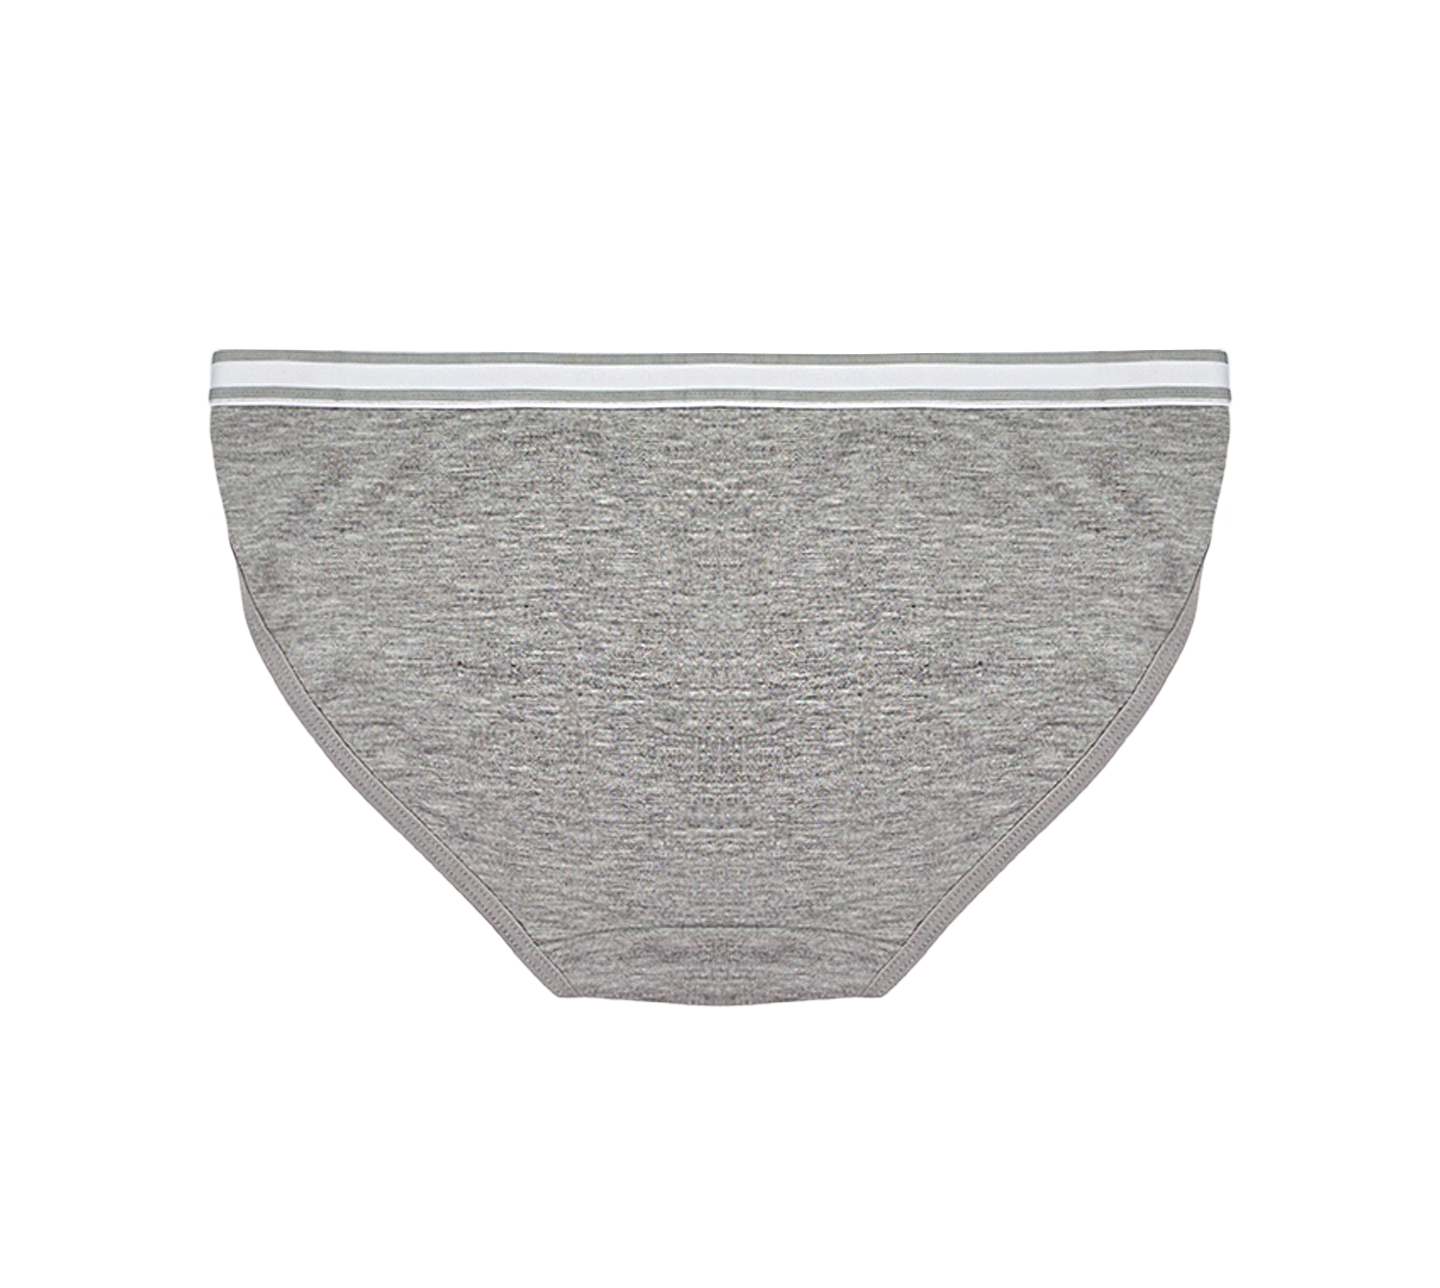 Underwear & Panties in the color silver for Women on sale